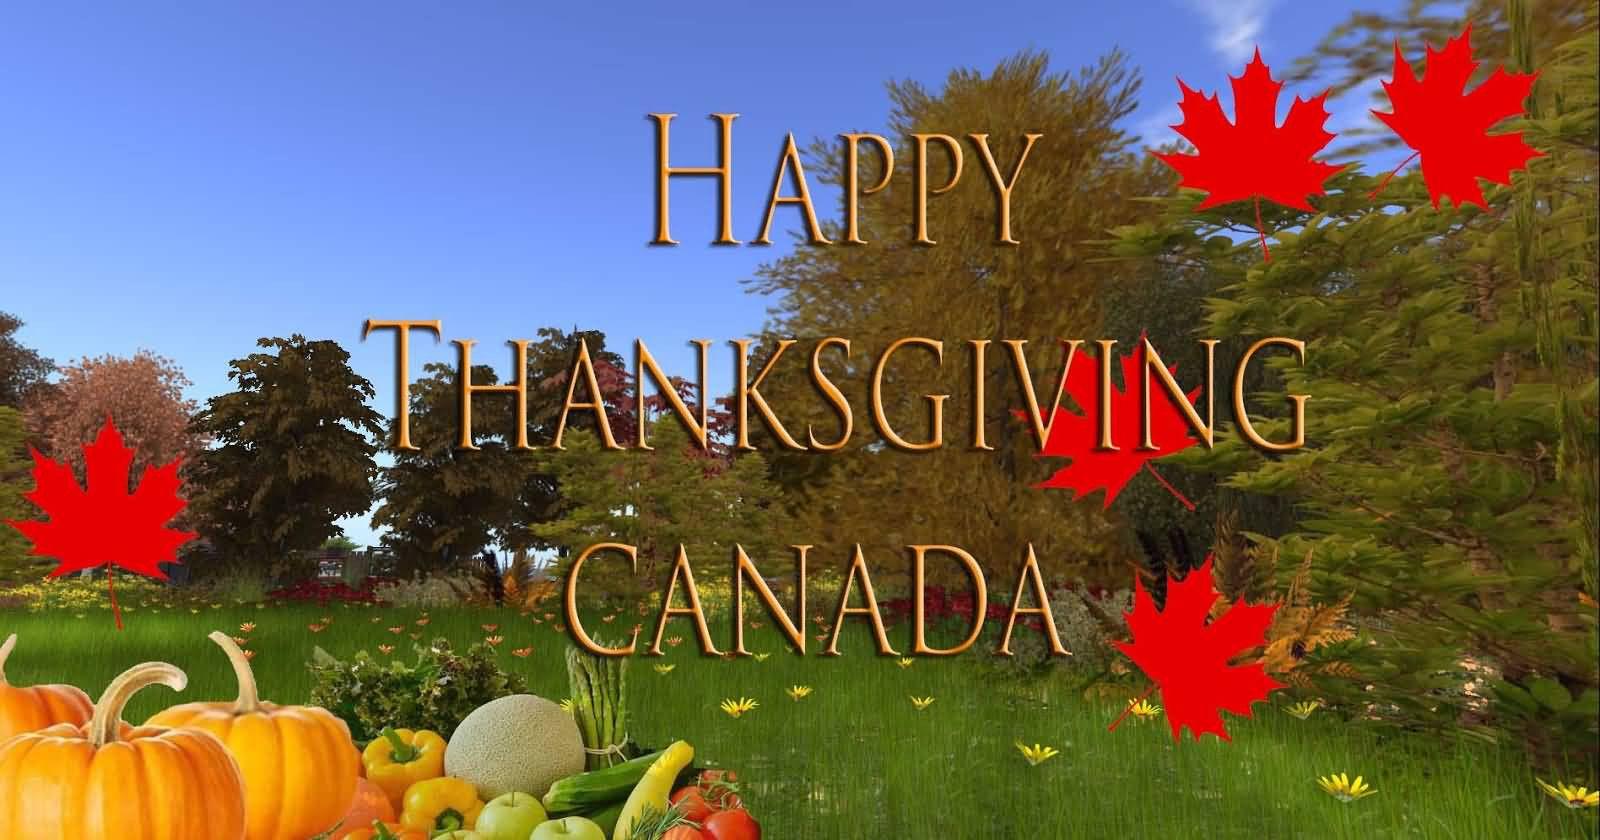 Canadian Thanksgiving Quotes
 Happy Thanksgiving Canada